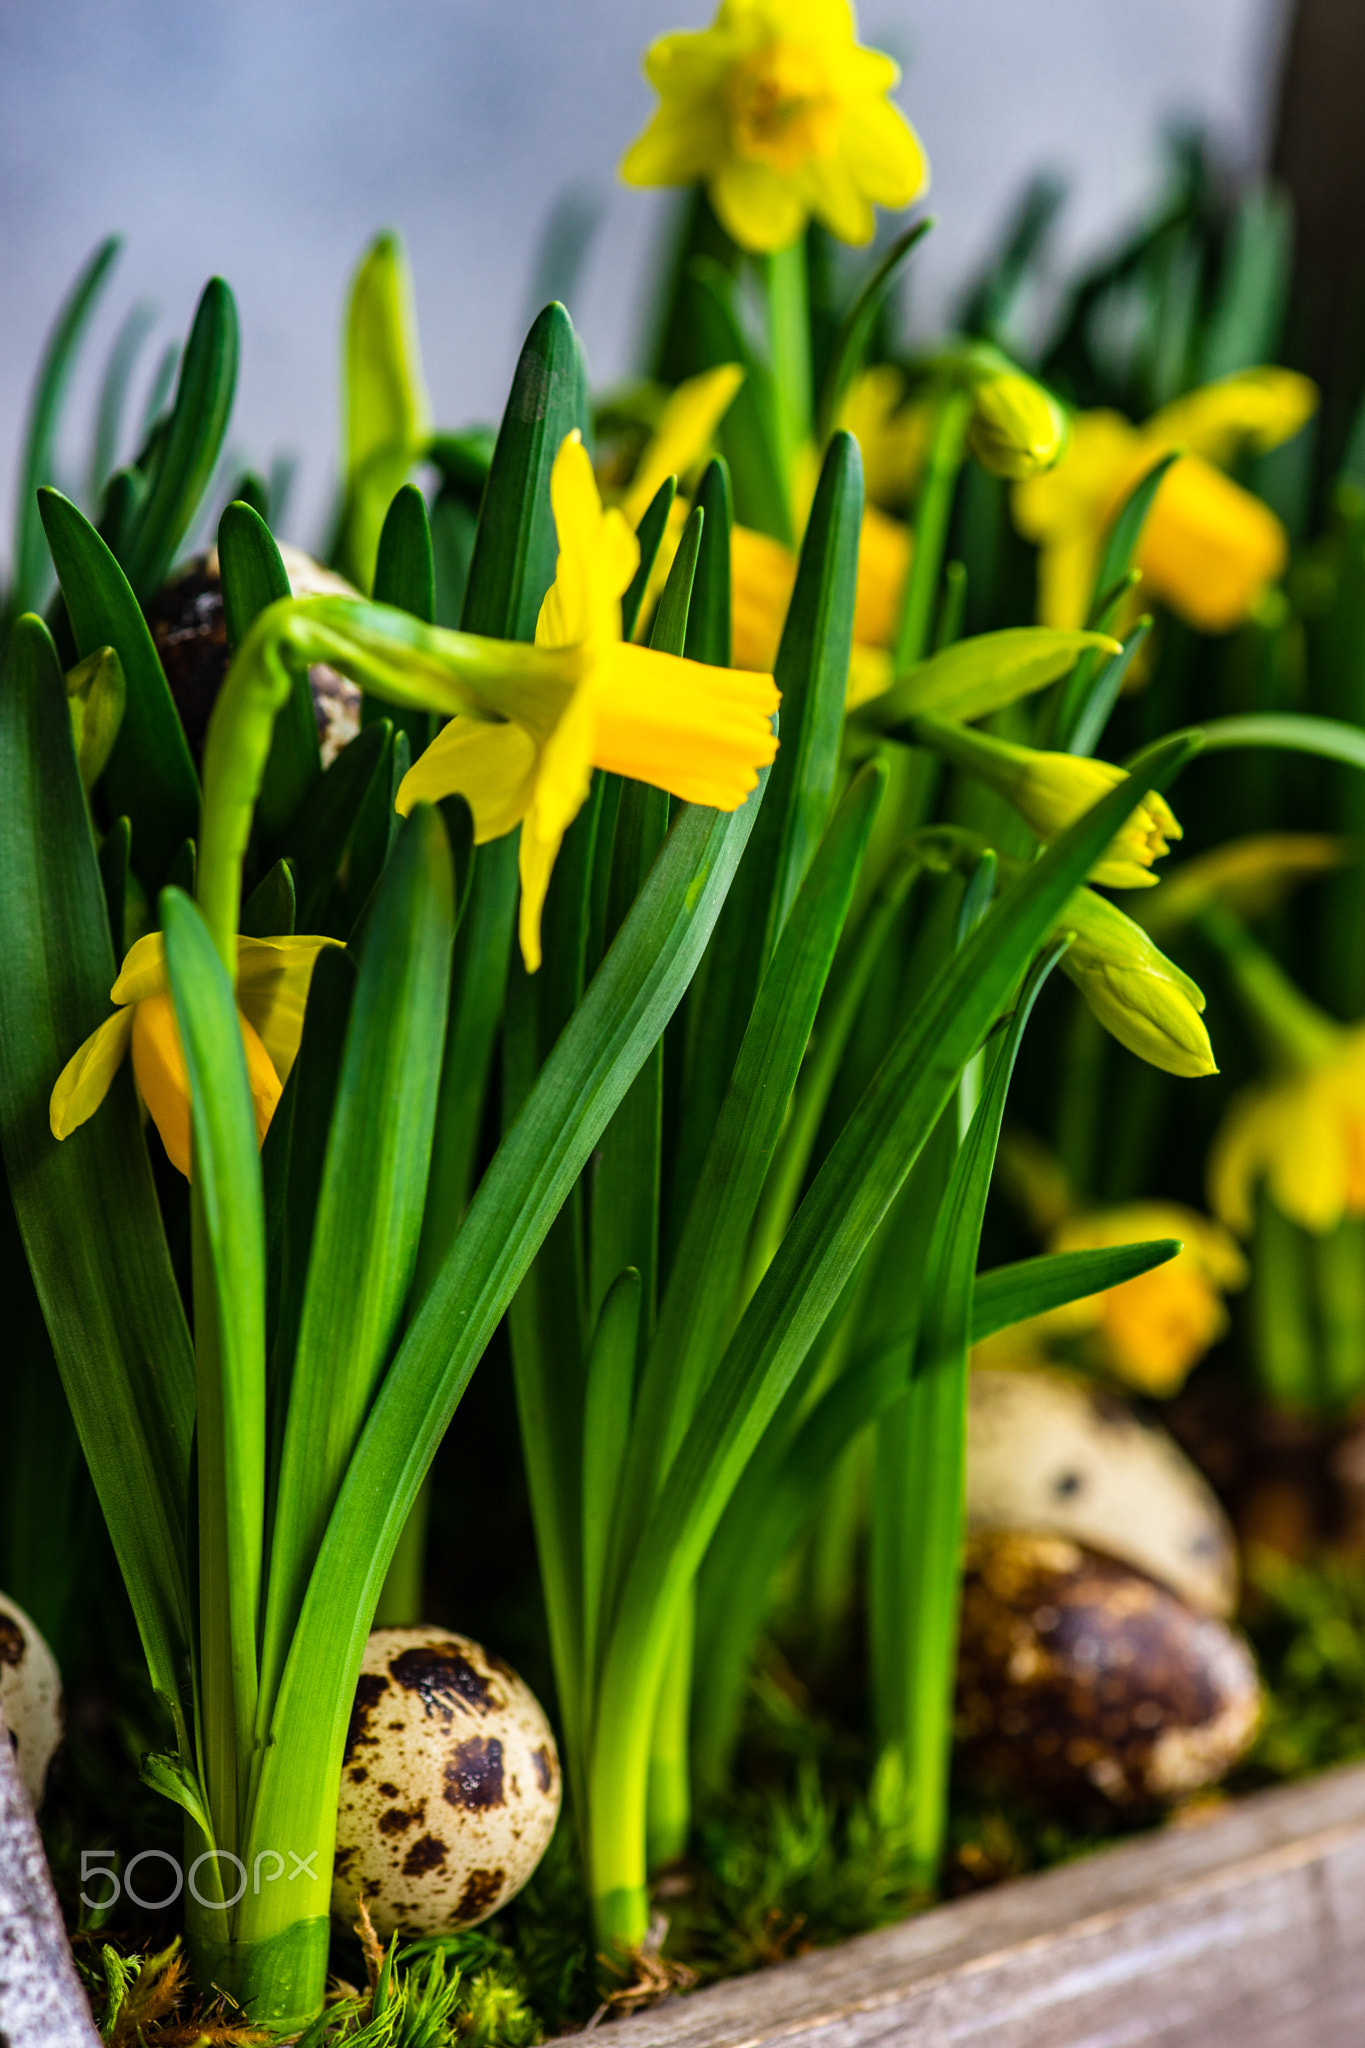 Interior composition with yellow daffodils